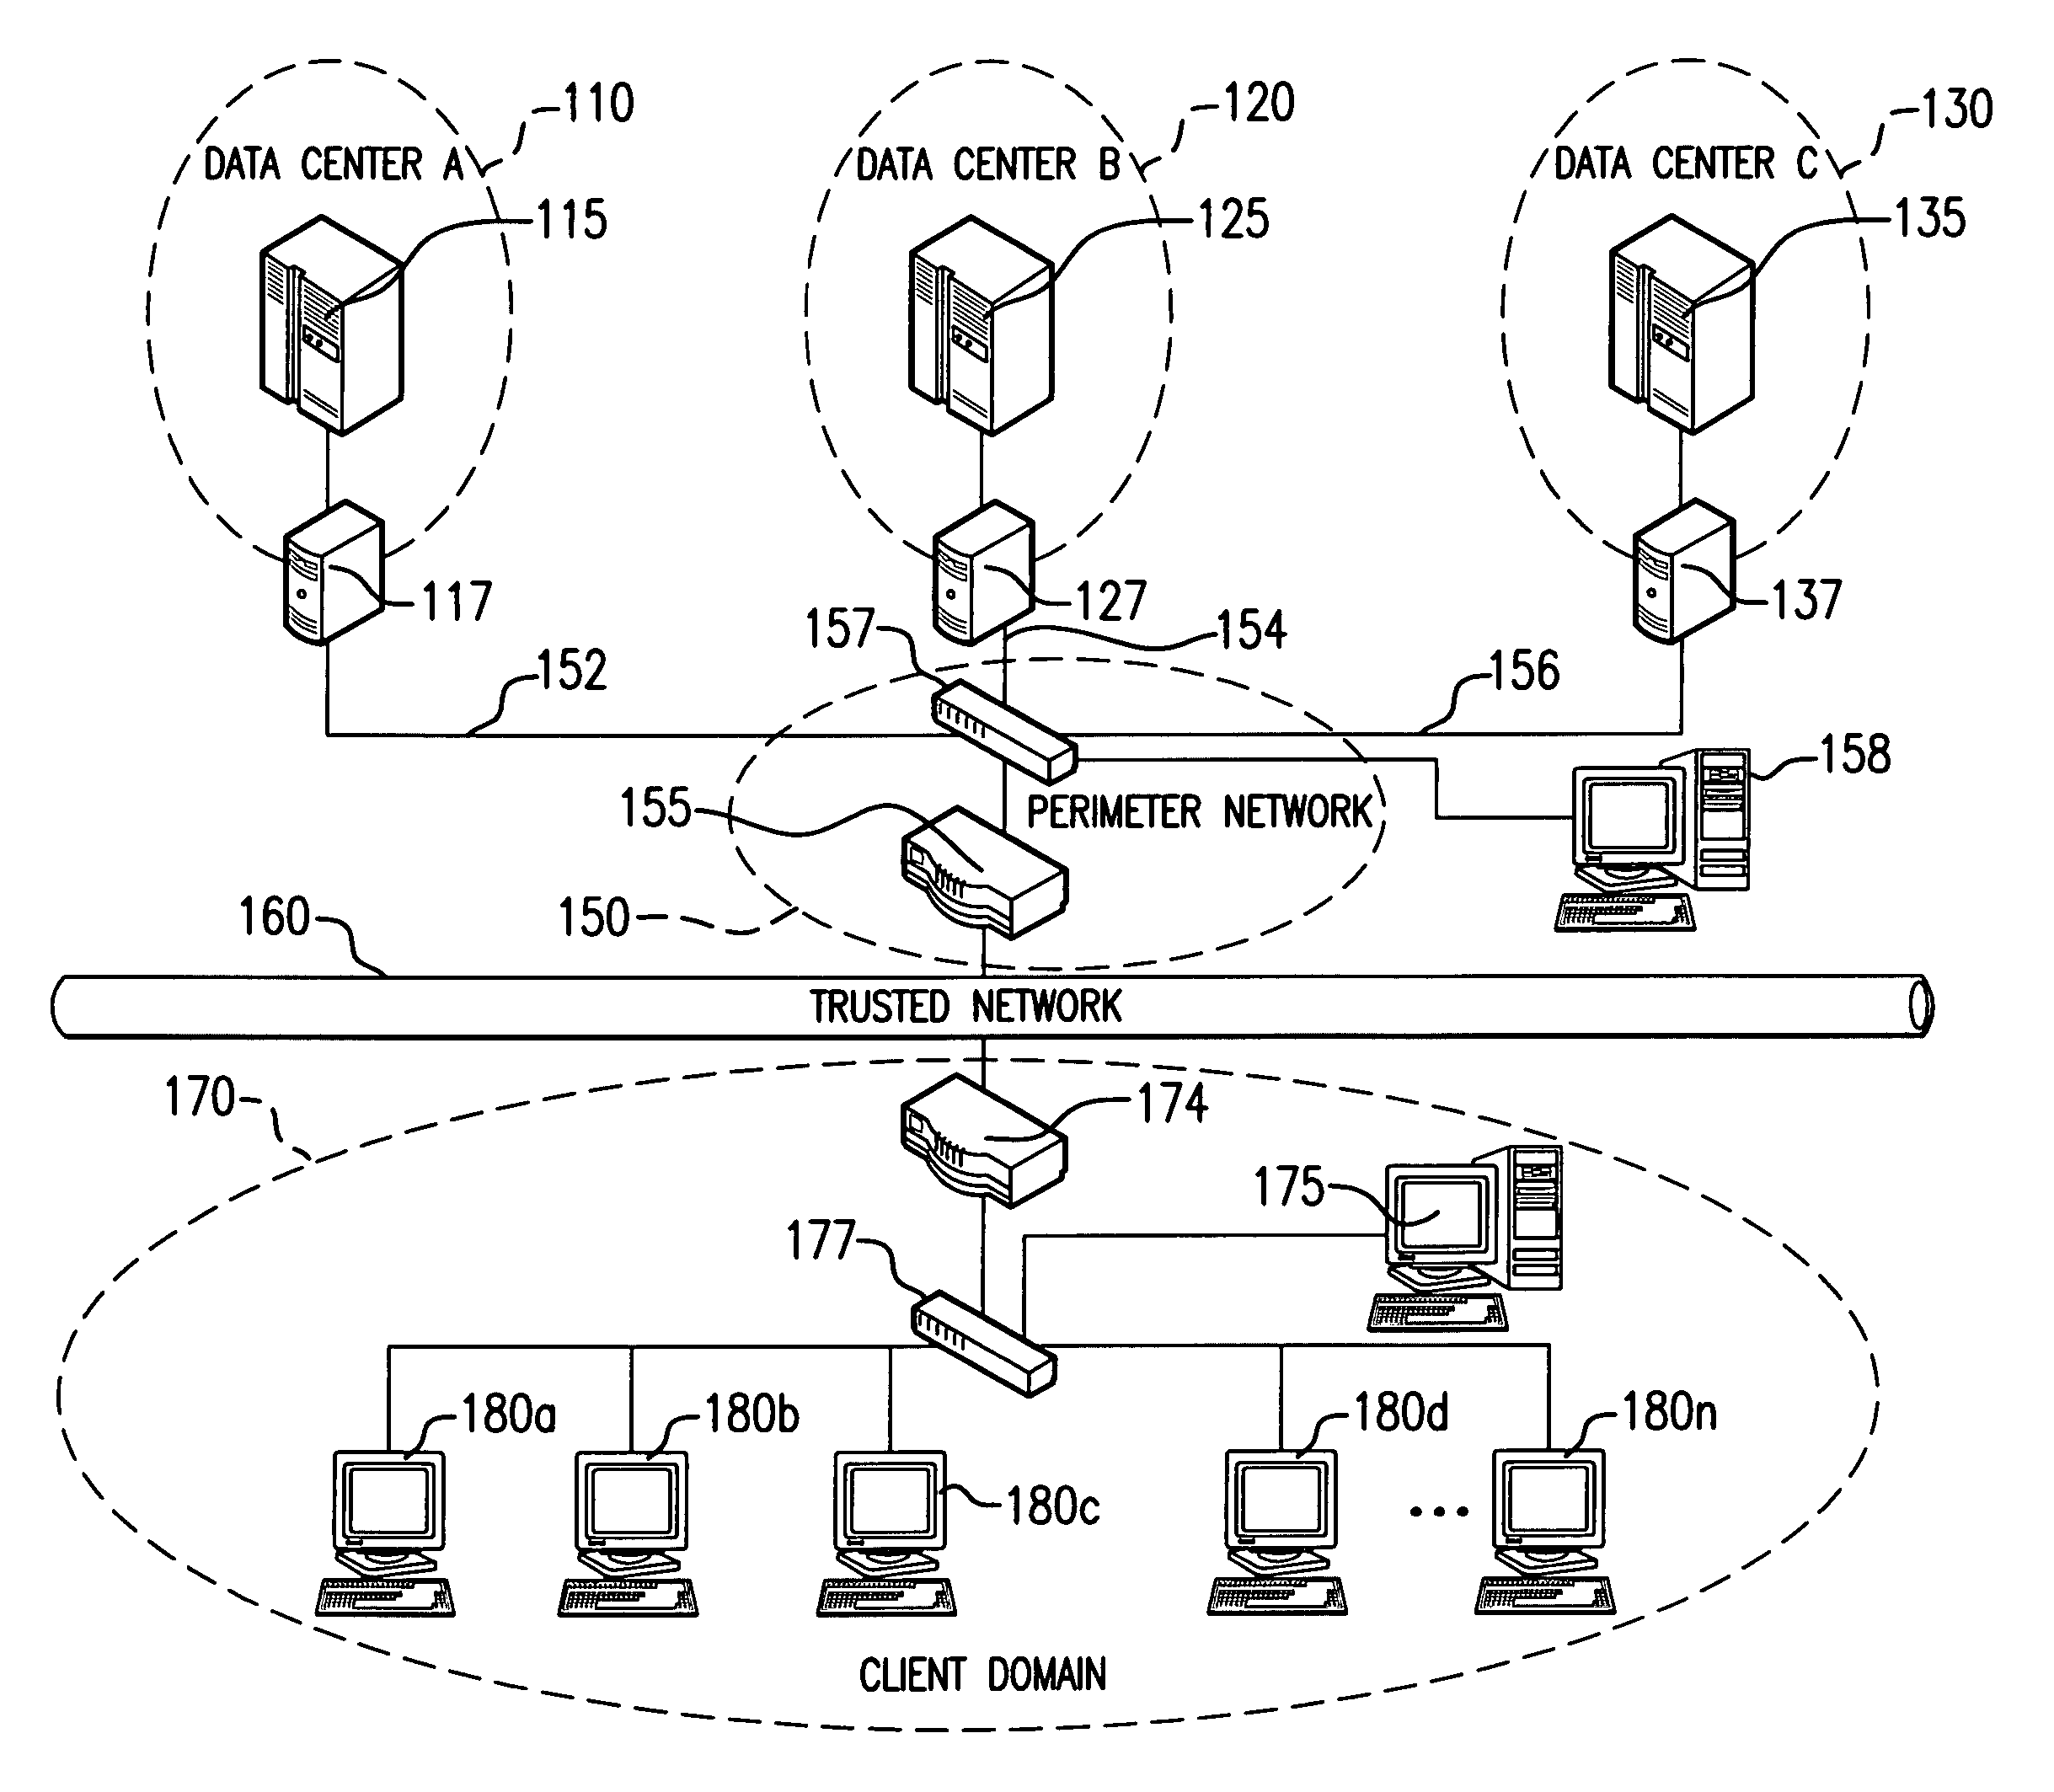 System for secure computing using defense-in-depth architecture